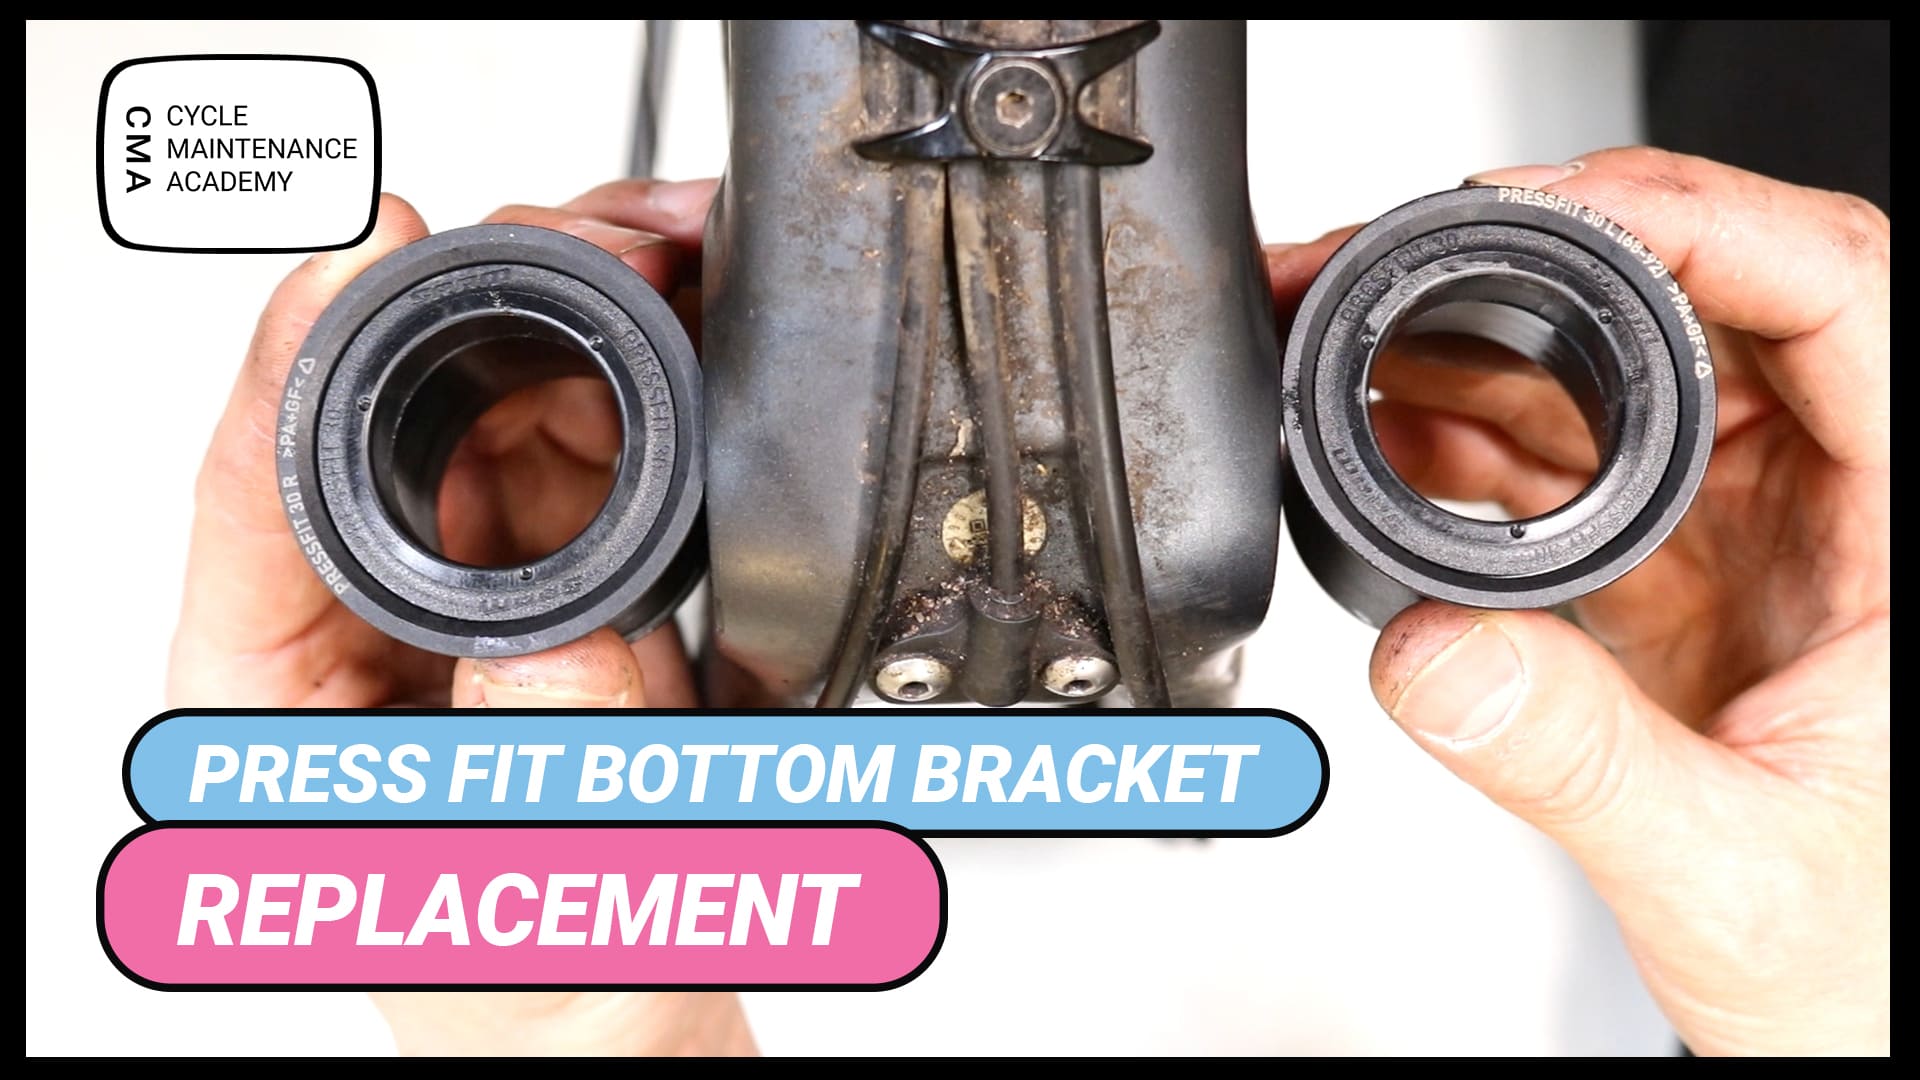 Press fit bottom bracket replacement - Cycle Maintenance Academy